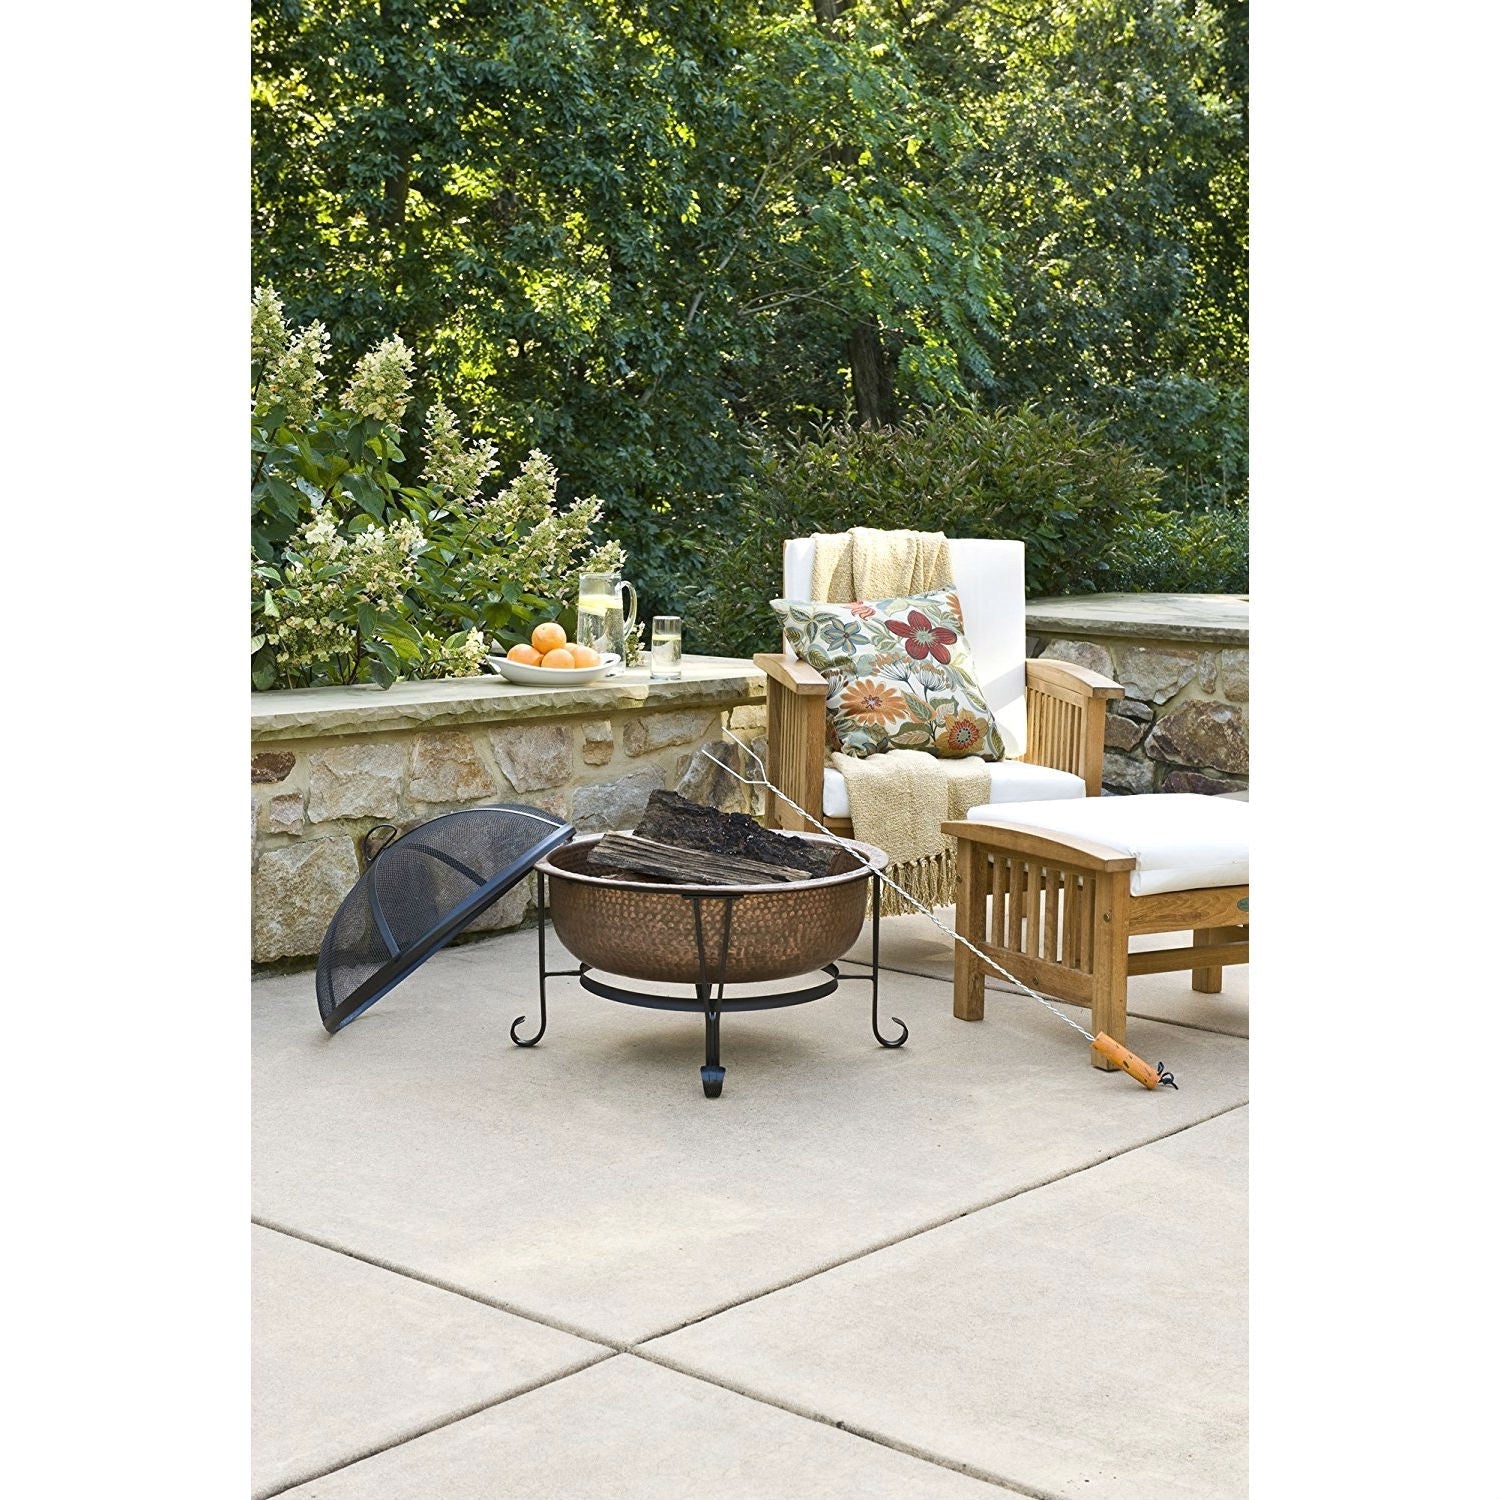 Outdoor > Outdoor Decor > Fire Pits - Hammered Copper Fire Pit With Heavy Duty Spark Guard Cover And Stand